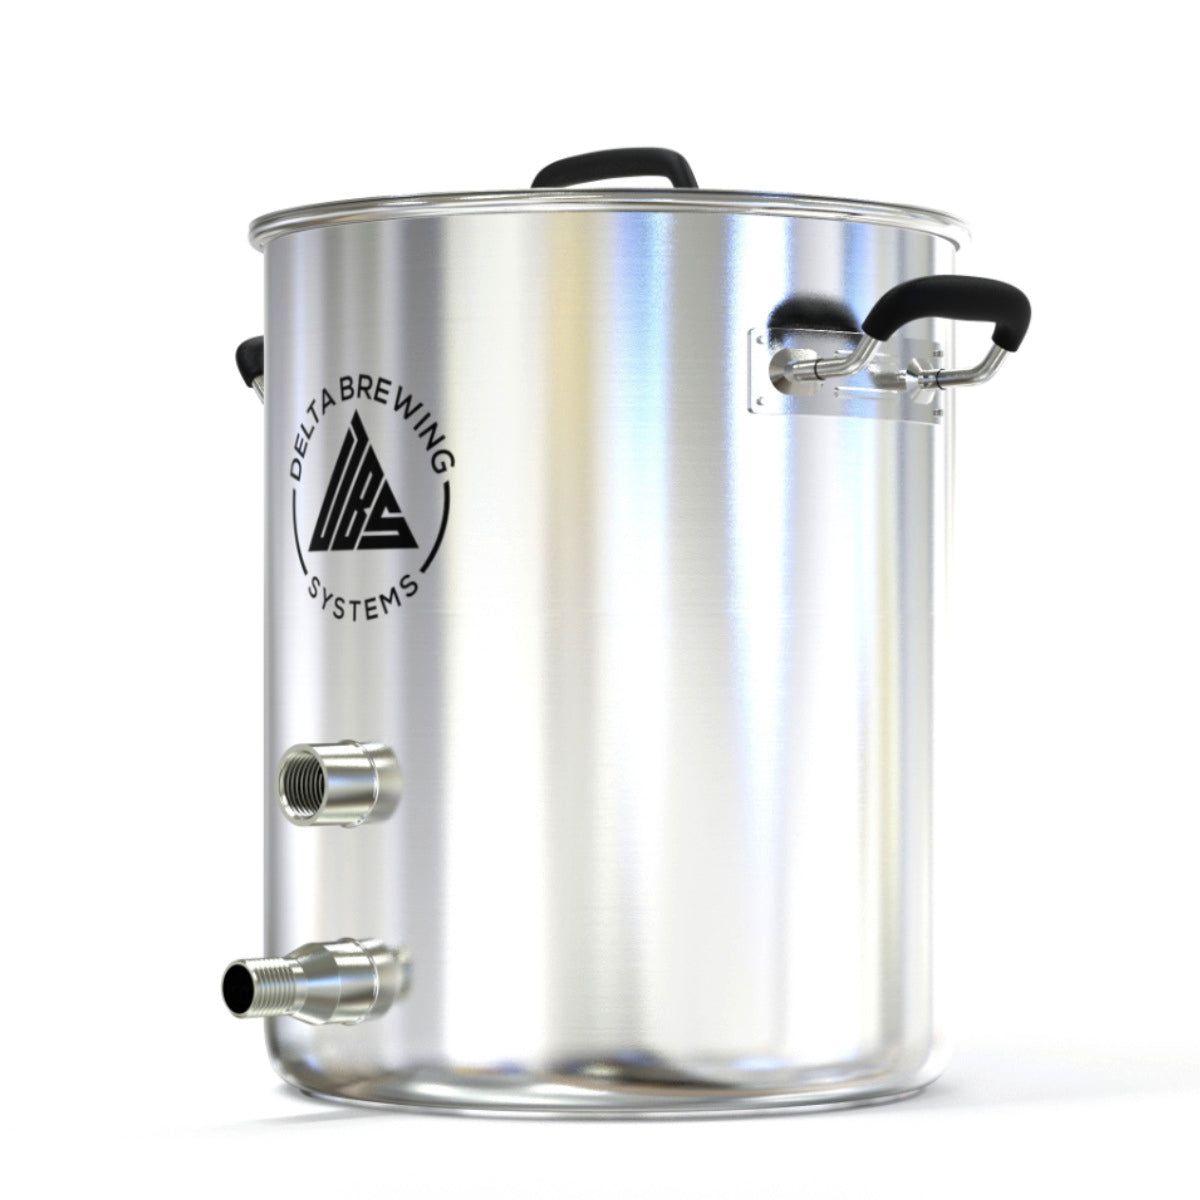 15 gallon kettle for homebrewing